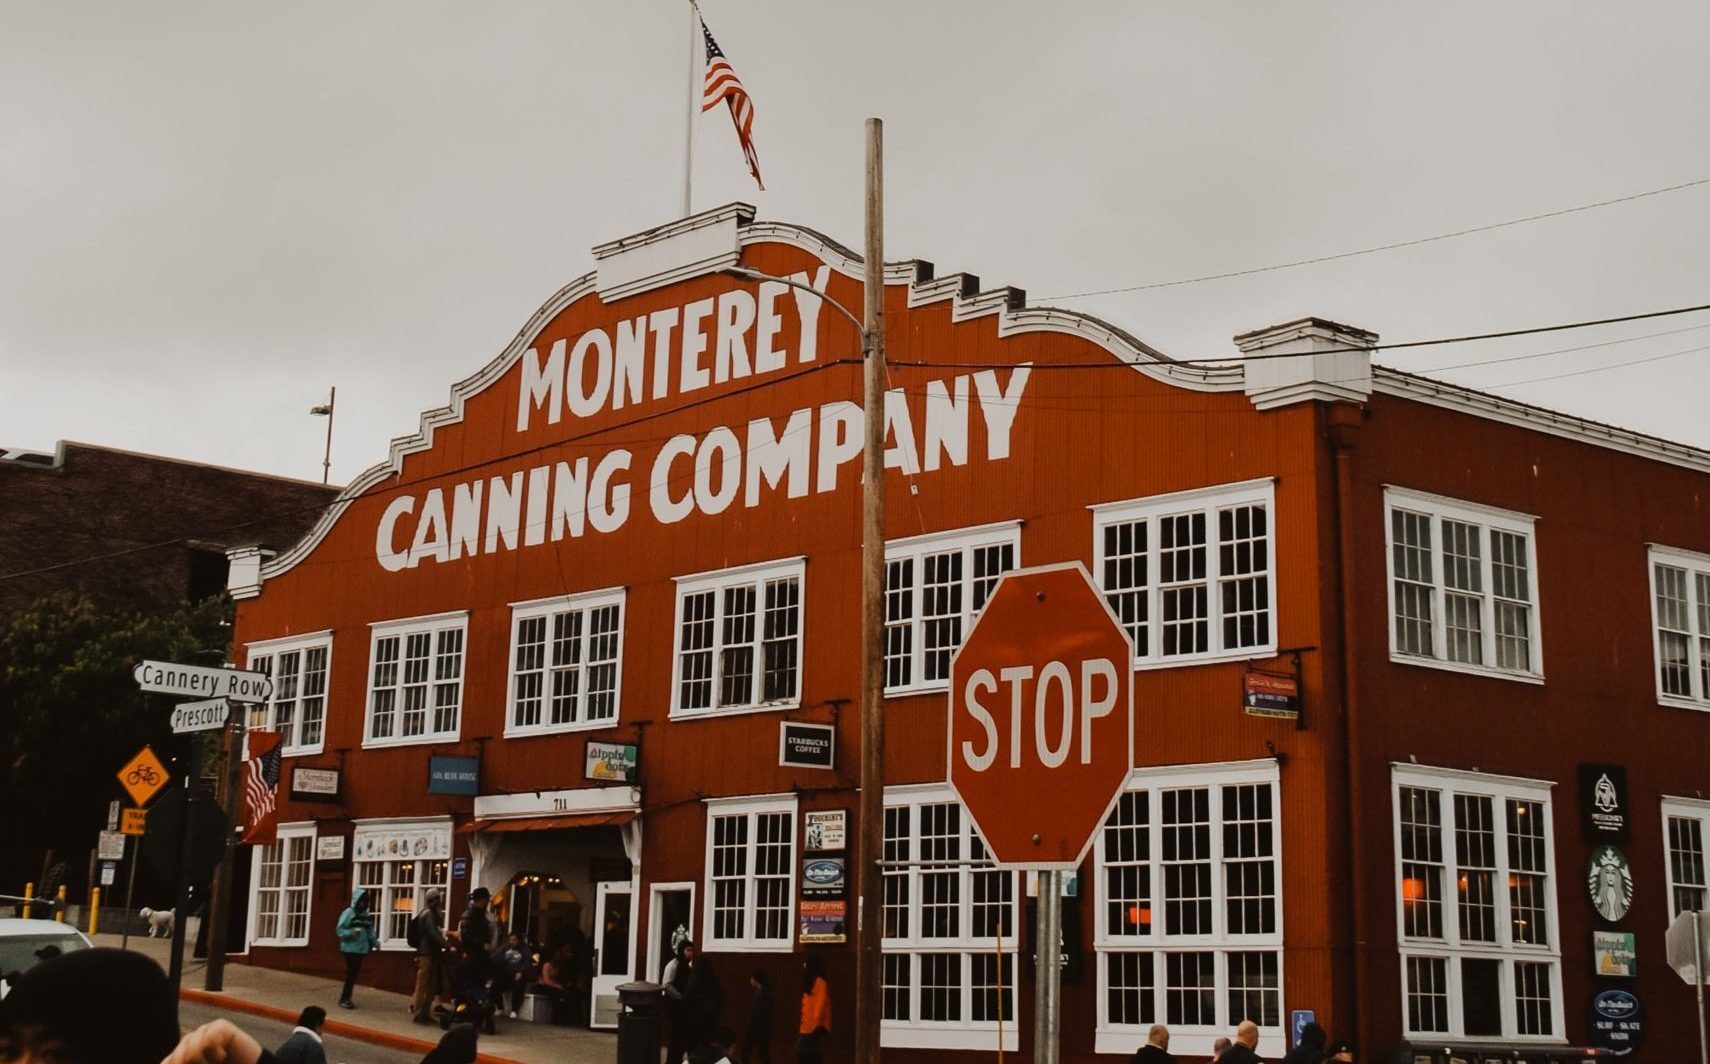 Cannery Row in Monterey, CA